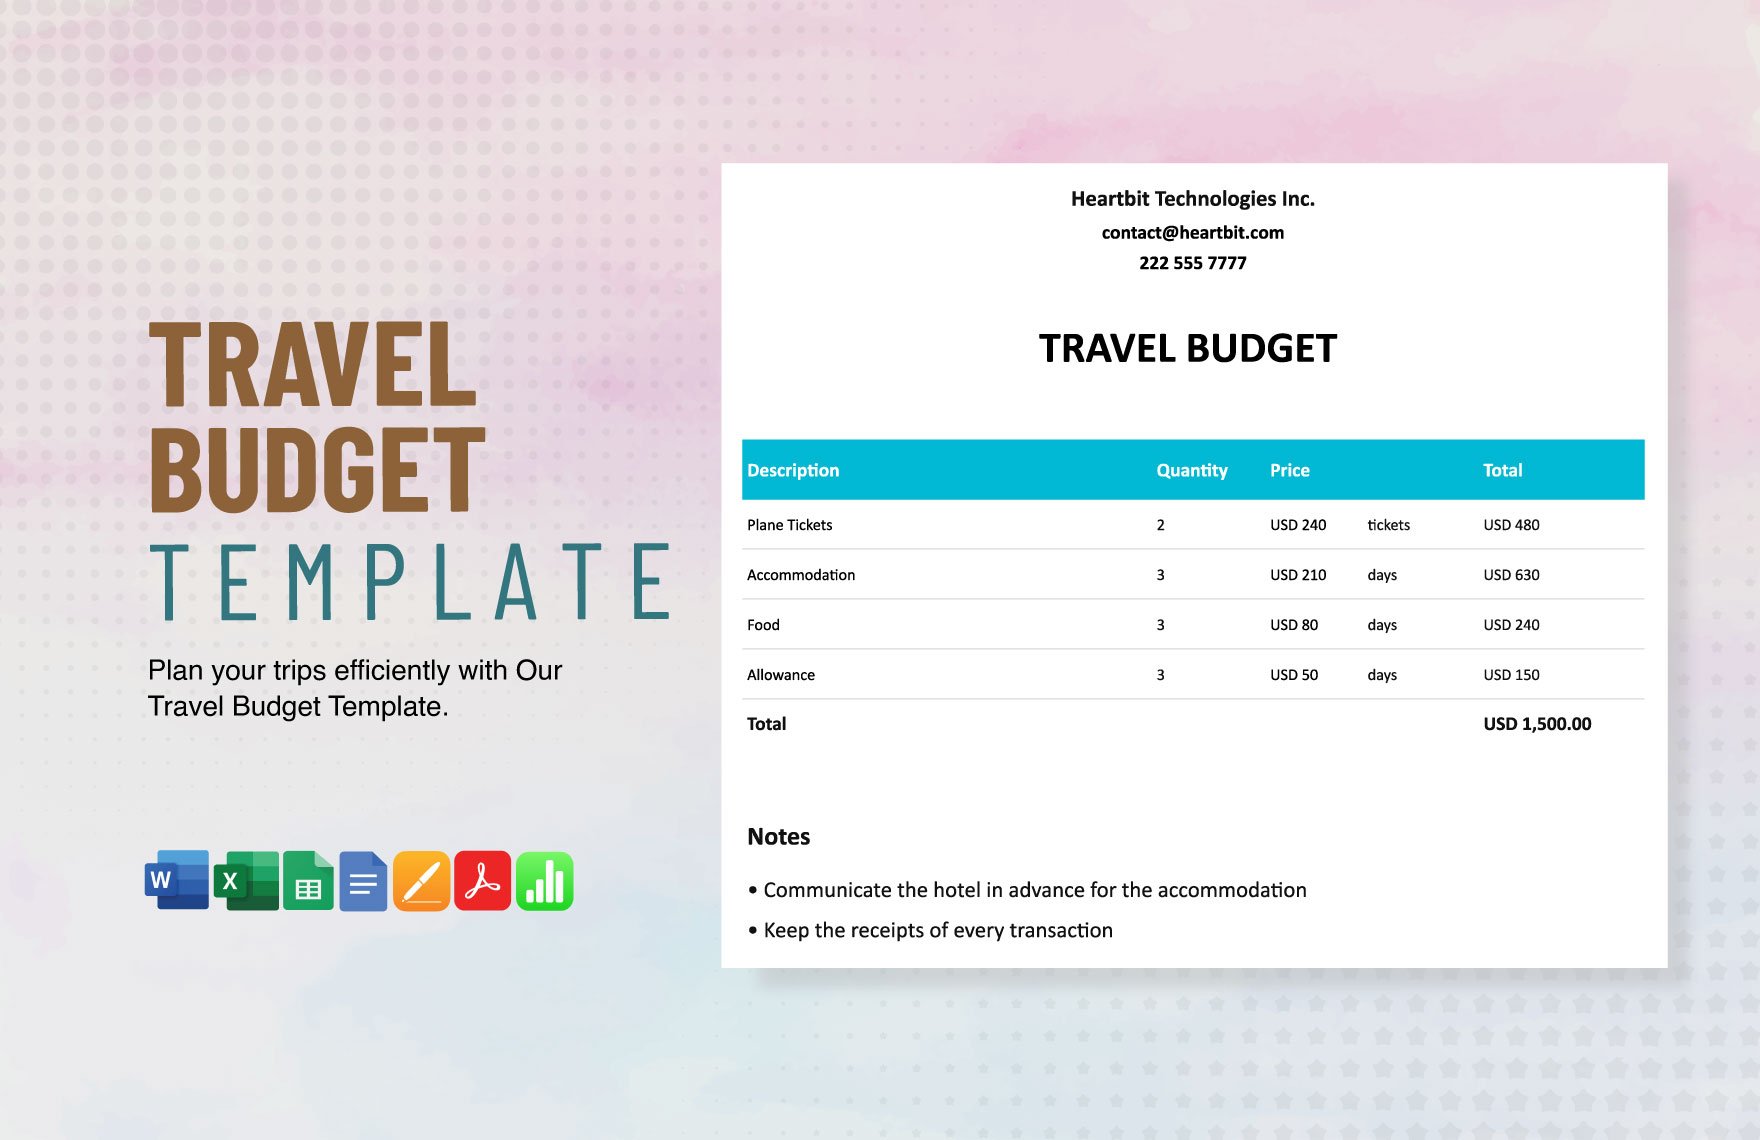 Sample Travel Budget Template in Word, Google Docs, Excel, PDF, Google Sheets, Apple Pages, Apple Numbers